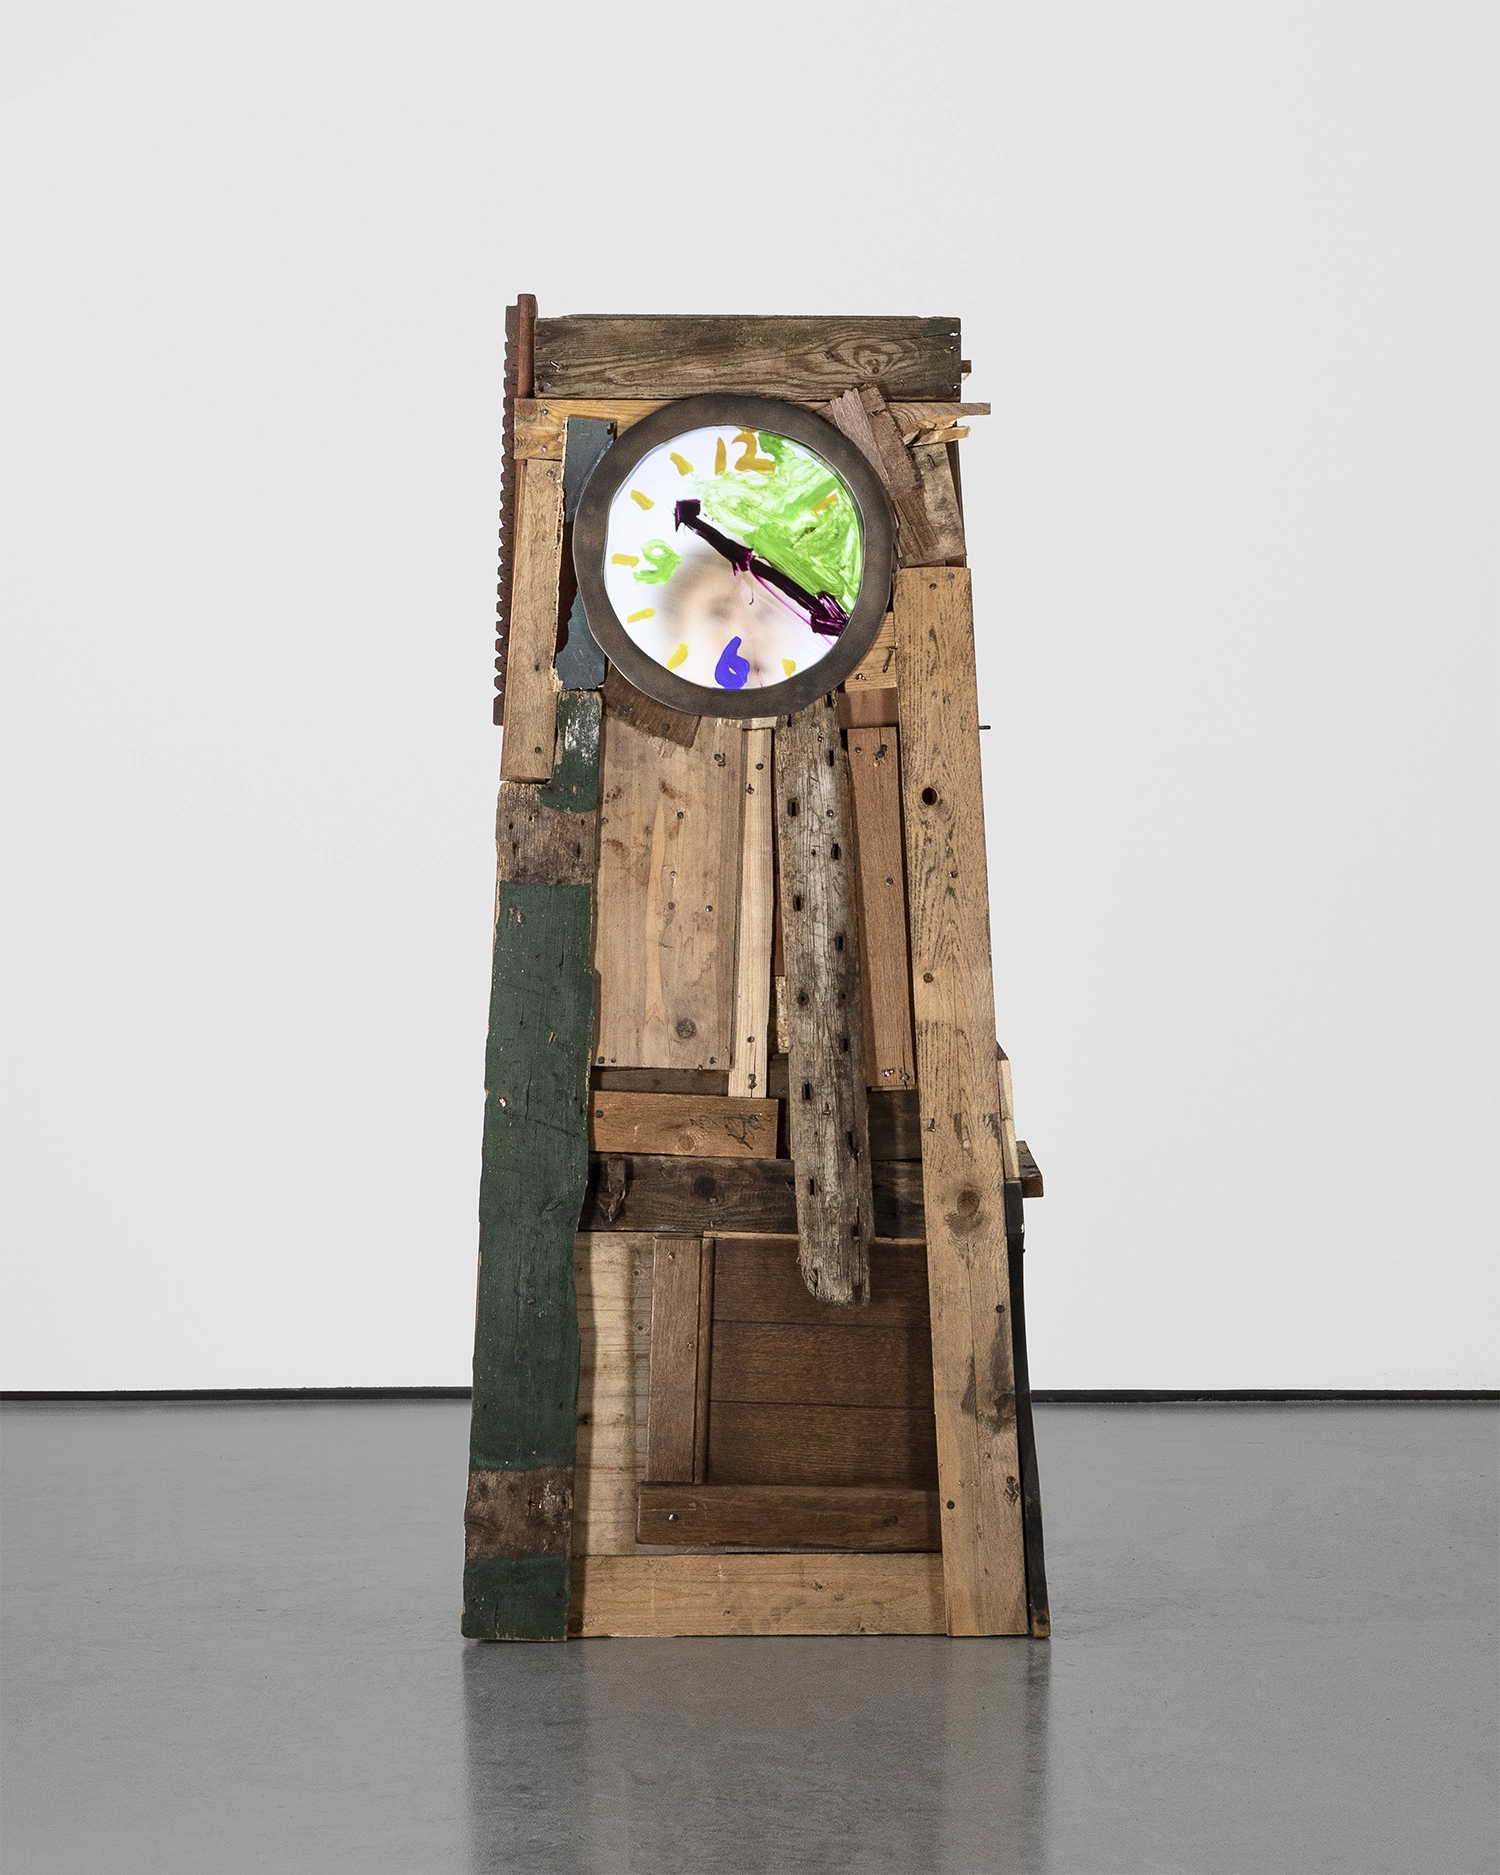 Grandfather Clock The Son 2022 by Maarten Baas at Carpenters Workshop Gallery. Image courtesy of Carpenters Workshop Gallery